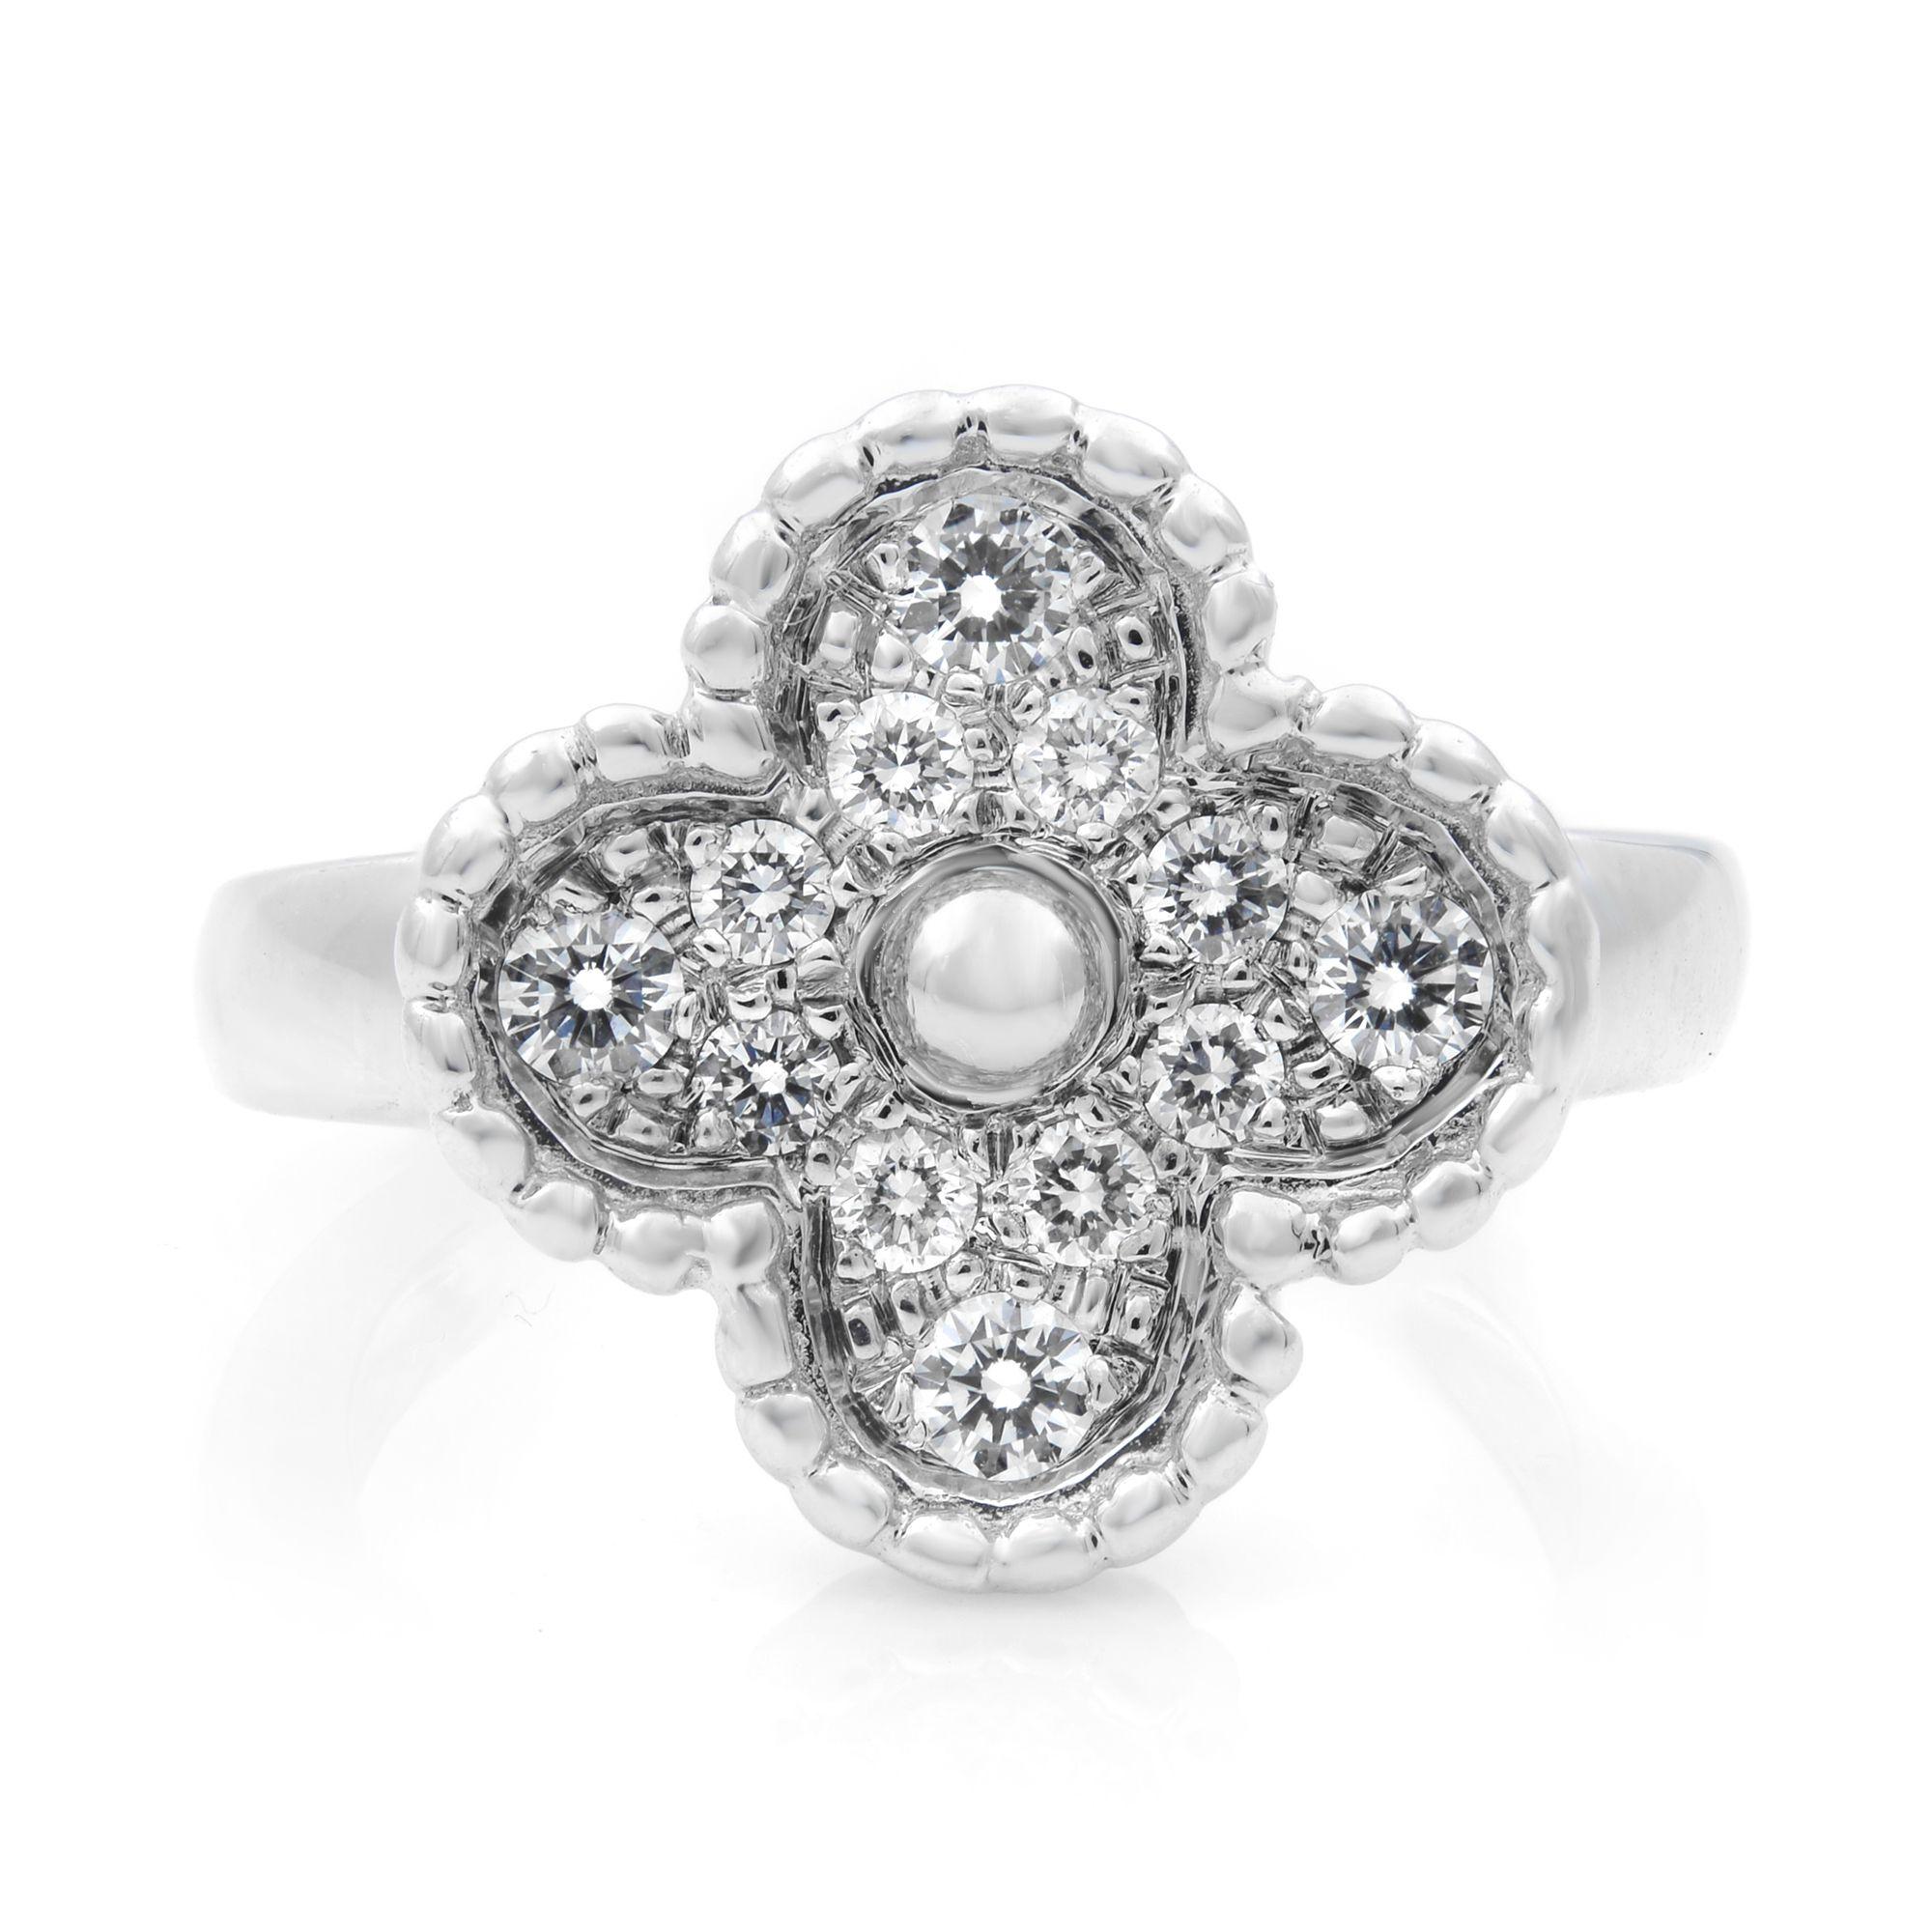 Vintage Alhambra creations by Van Cleef & Arpels are distinguished by their unique, timeless elegance. Inspired by the clover leaf, these icons of luck are adorned with a border of golden beads.
Vintage Alhambra ring, 18k white gold, 12 round cut